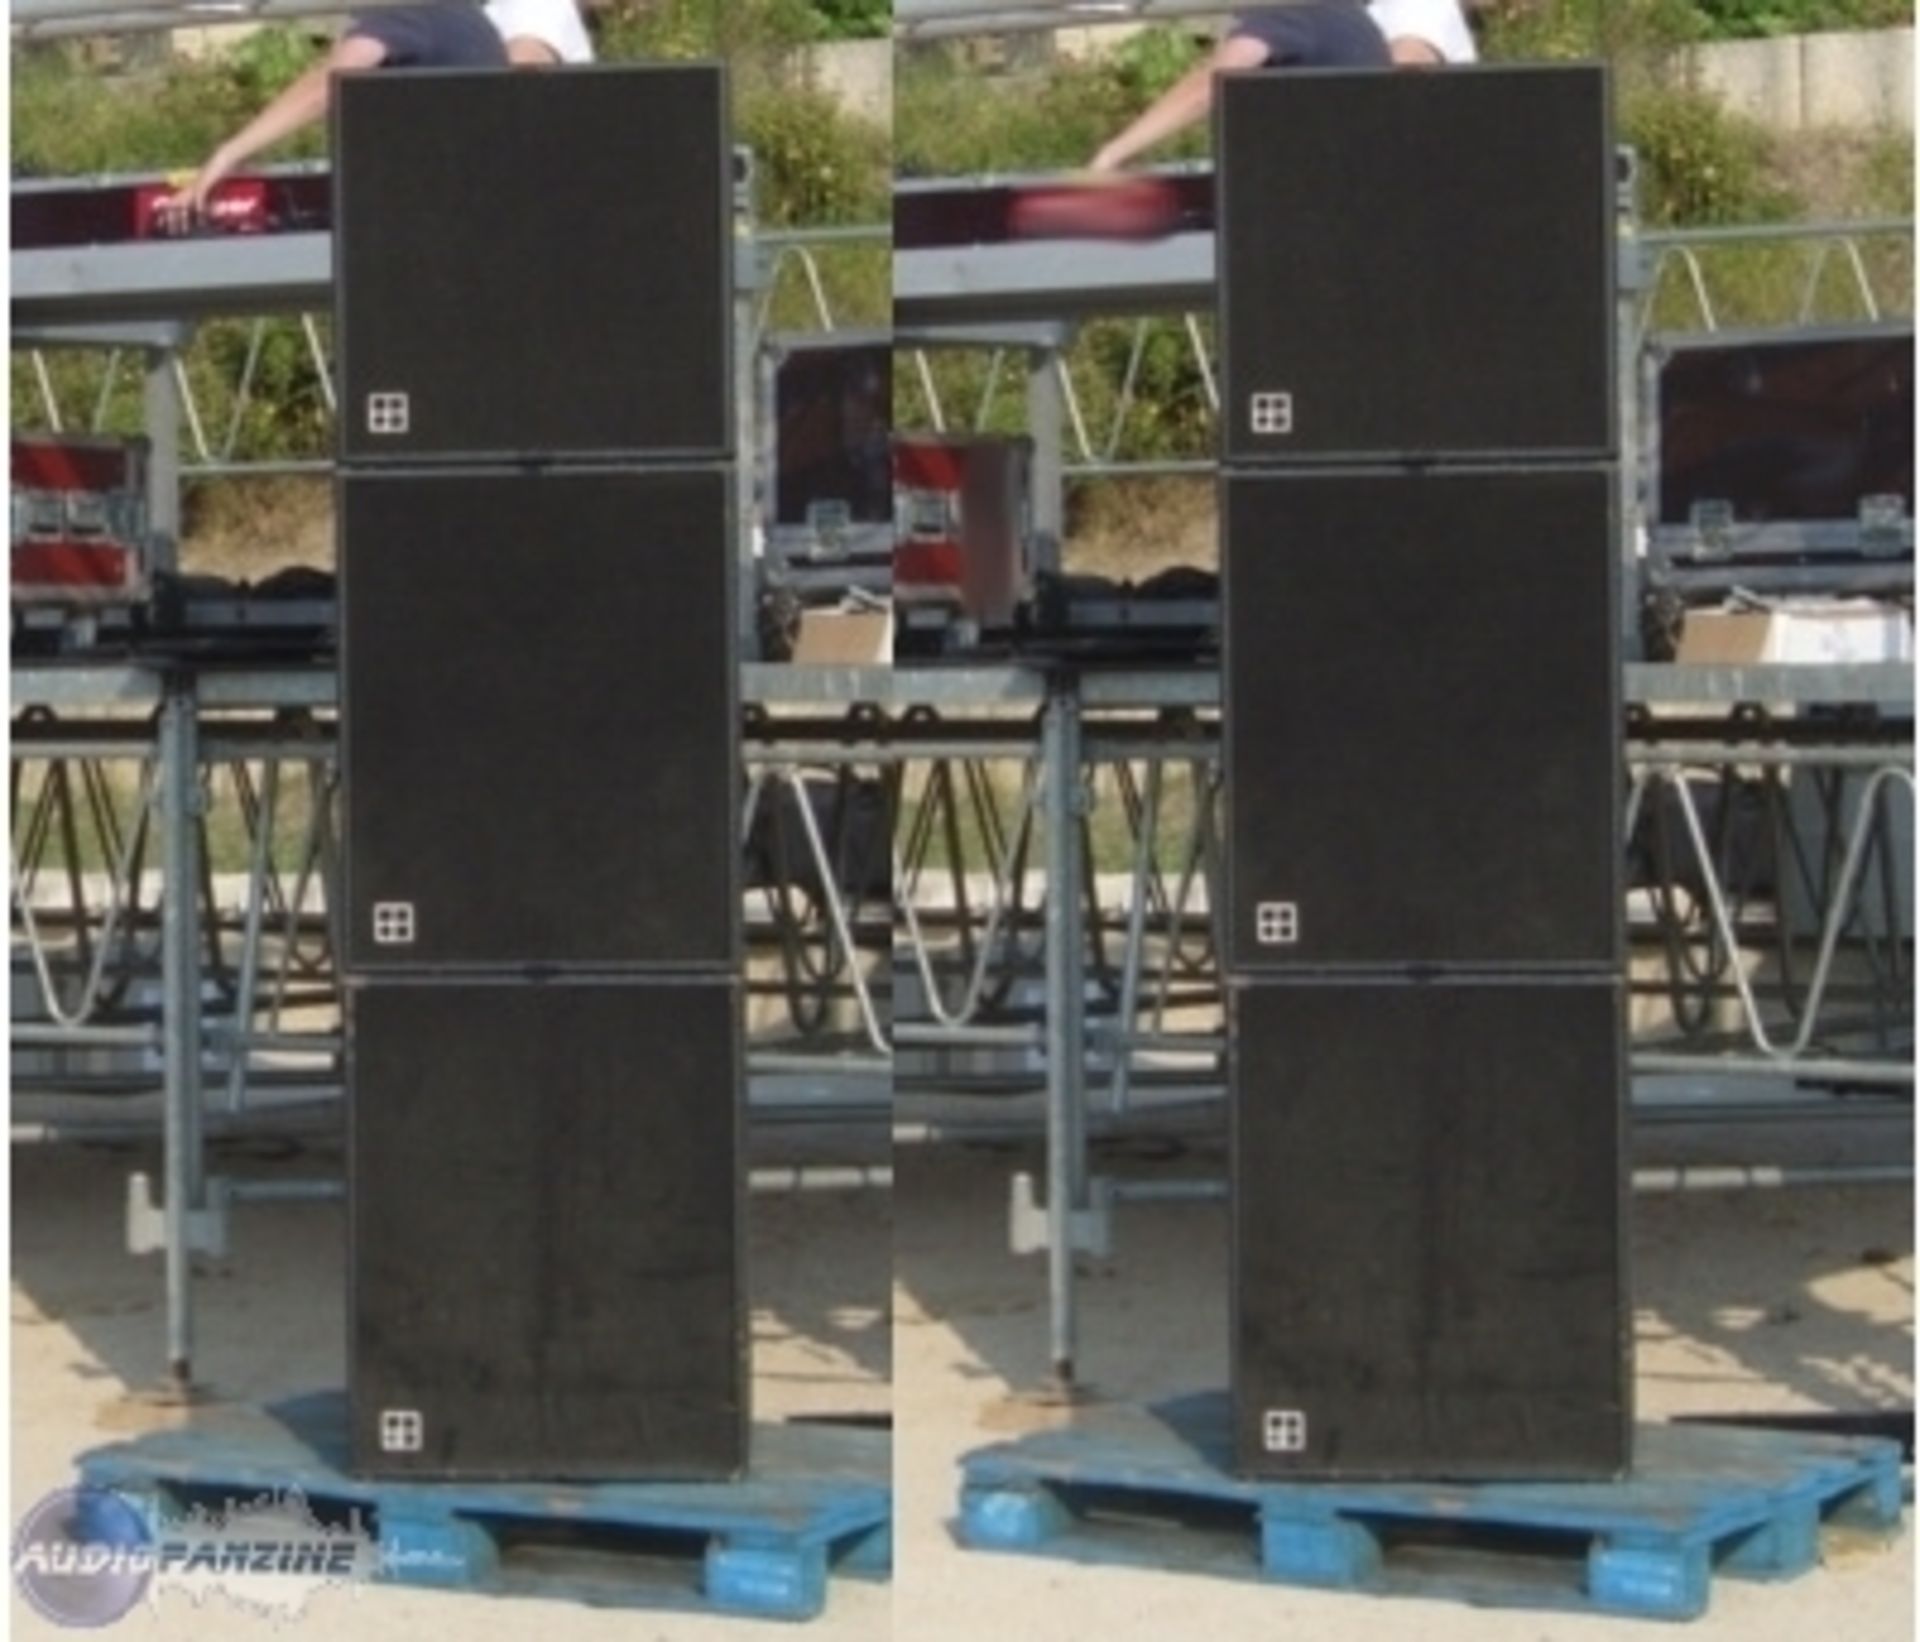 D and B Audiotechnik C7 Series Sound System with D12 Amplifiers, Racks and Cabling - Image 3 of 7